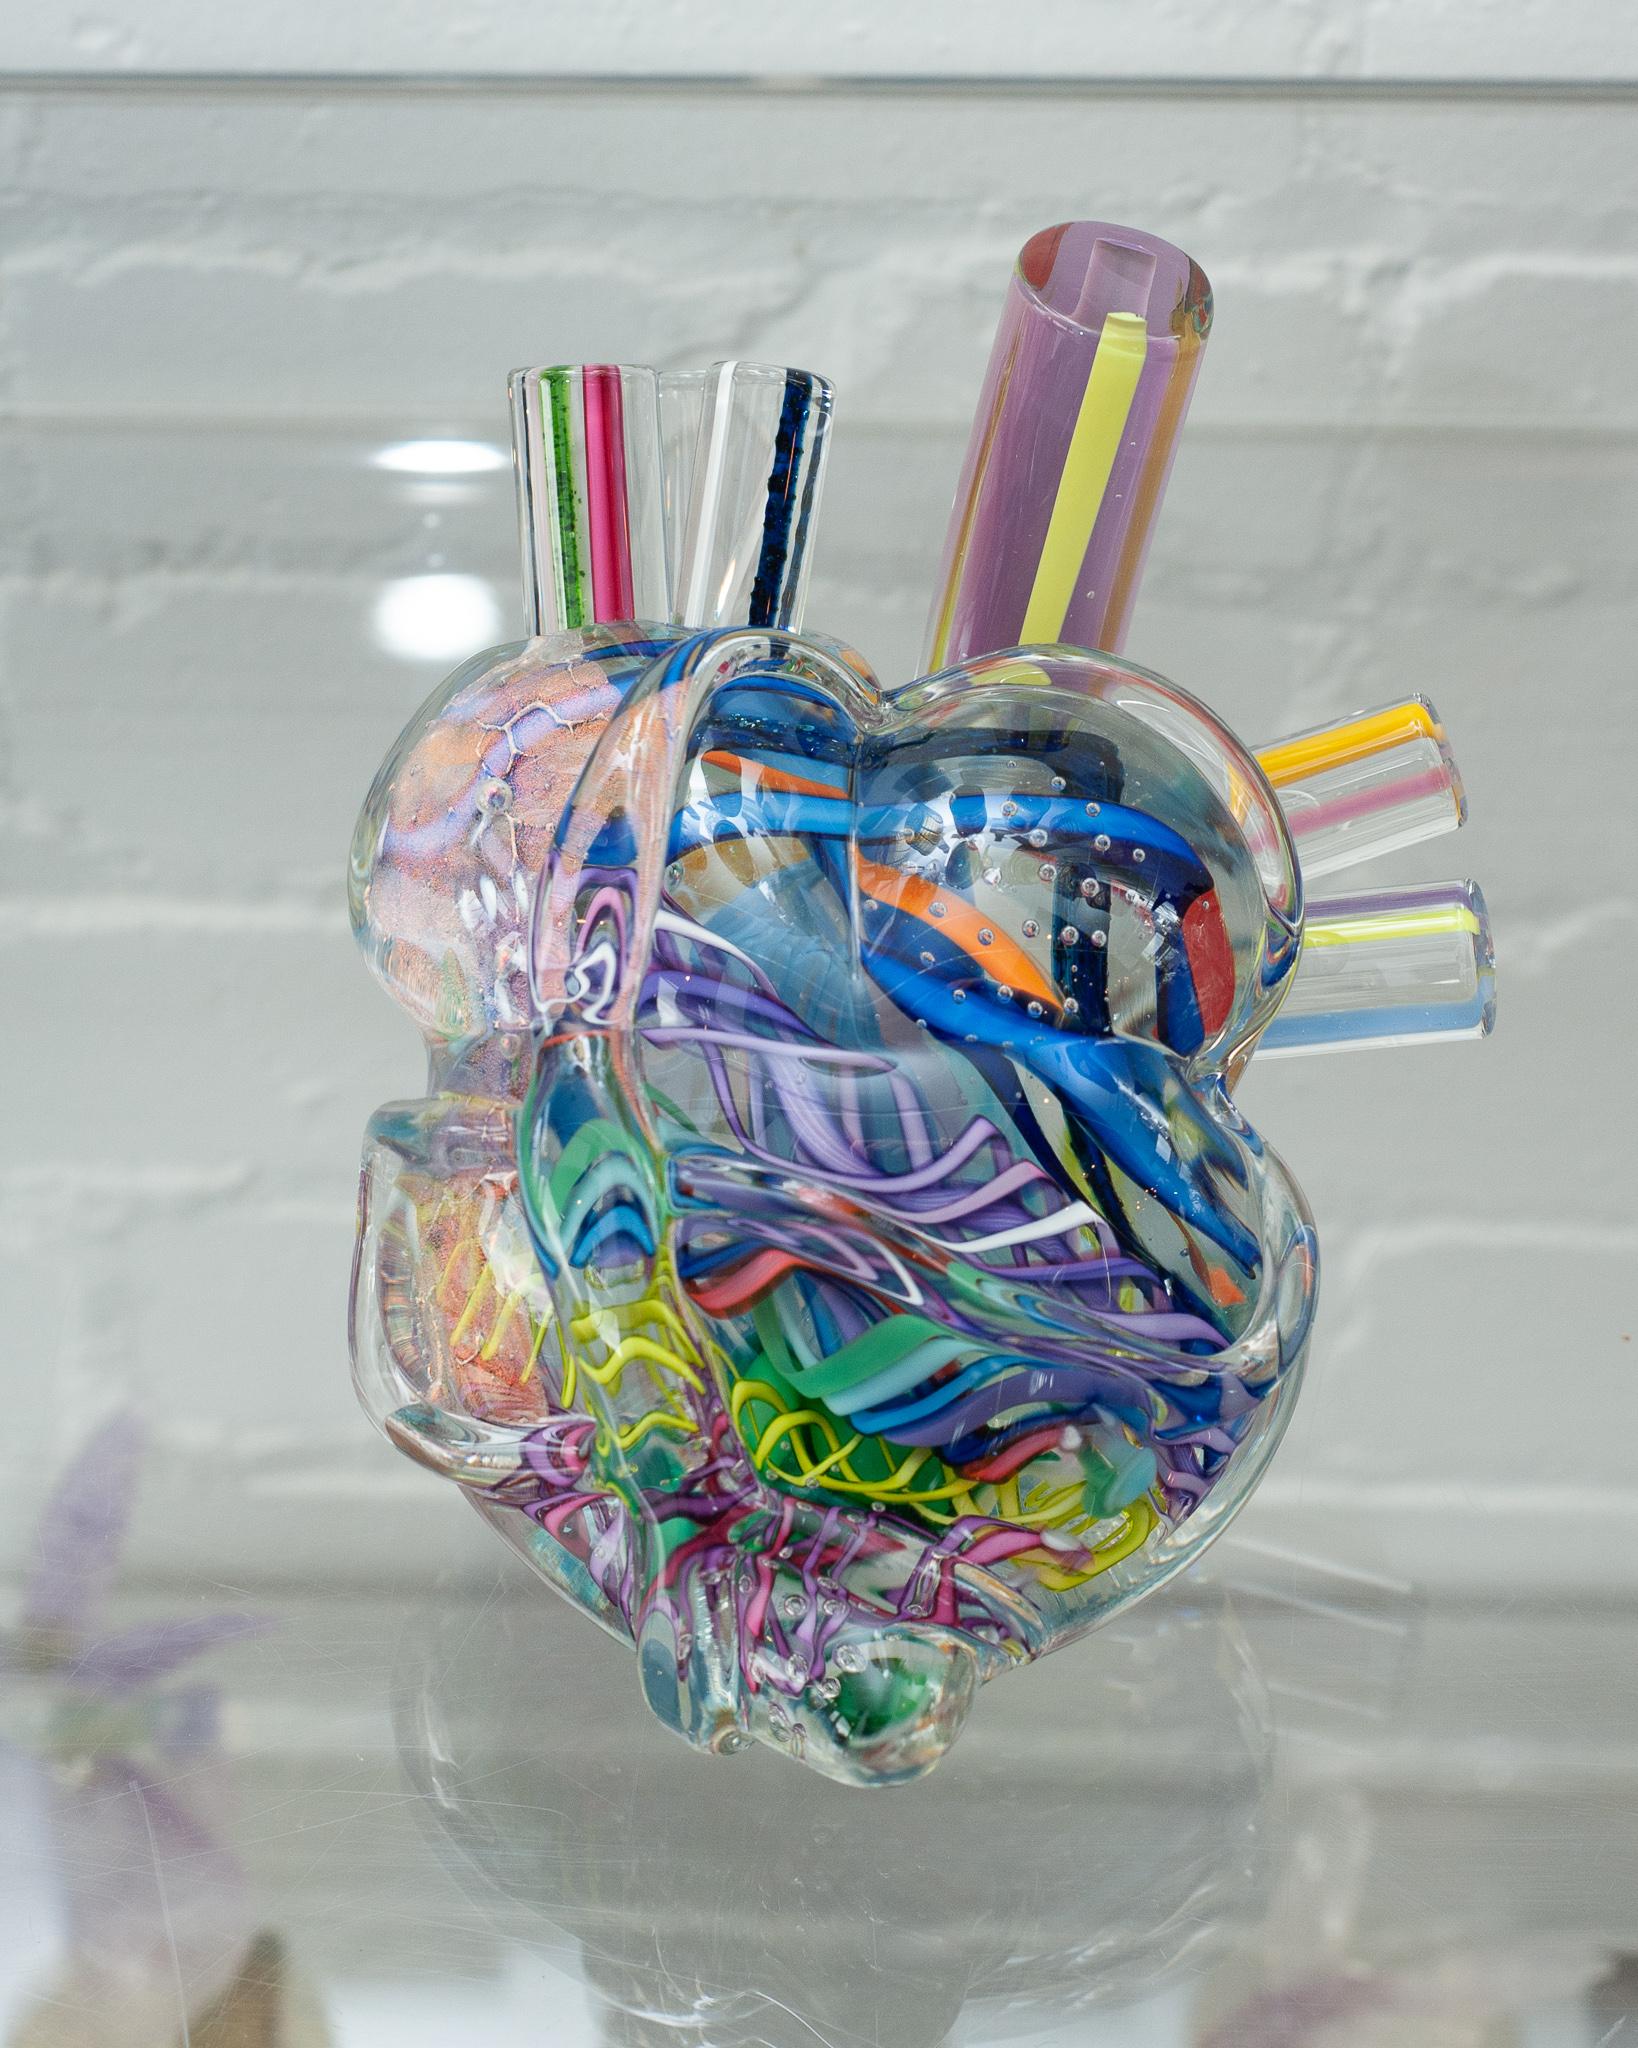 A stunning and unique decorative and blown glass anatomical heart sculpture in multicolour by a Canadian artist. A one of kind work of glass art, this sculpture features multiple depths of colour and iridescence.